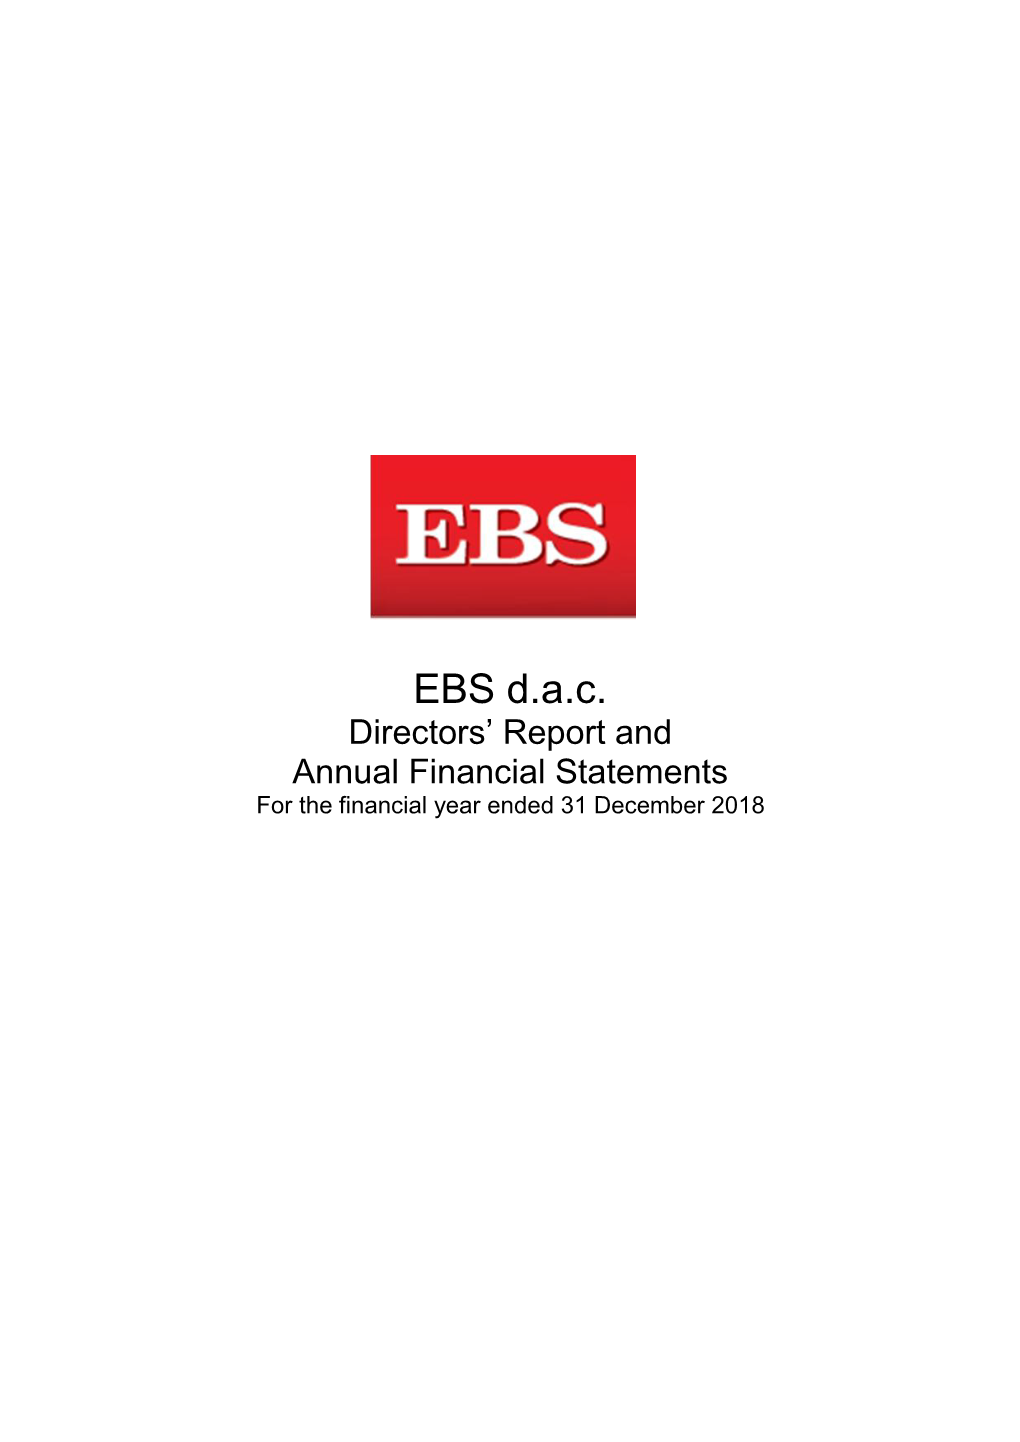 EBS D.A.C. Directors’ Report and Annual Financial Statements for the Financial Year Ended 31 December 2018 ______Contents